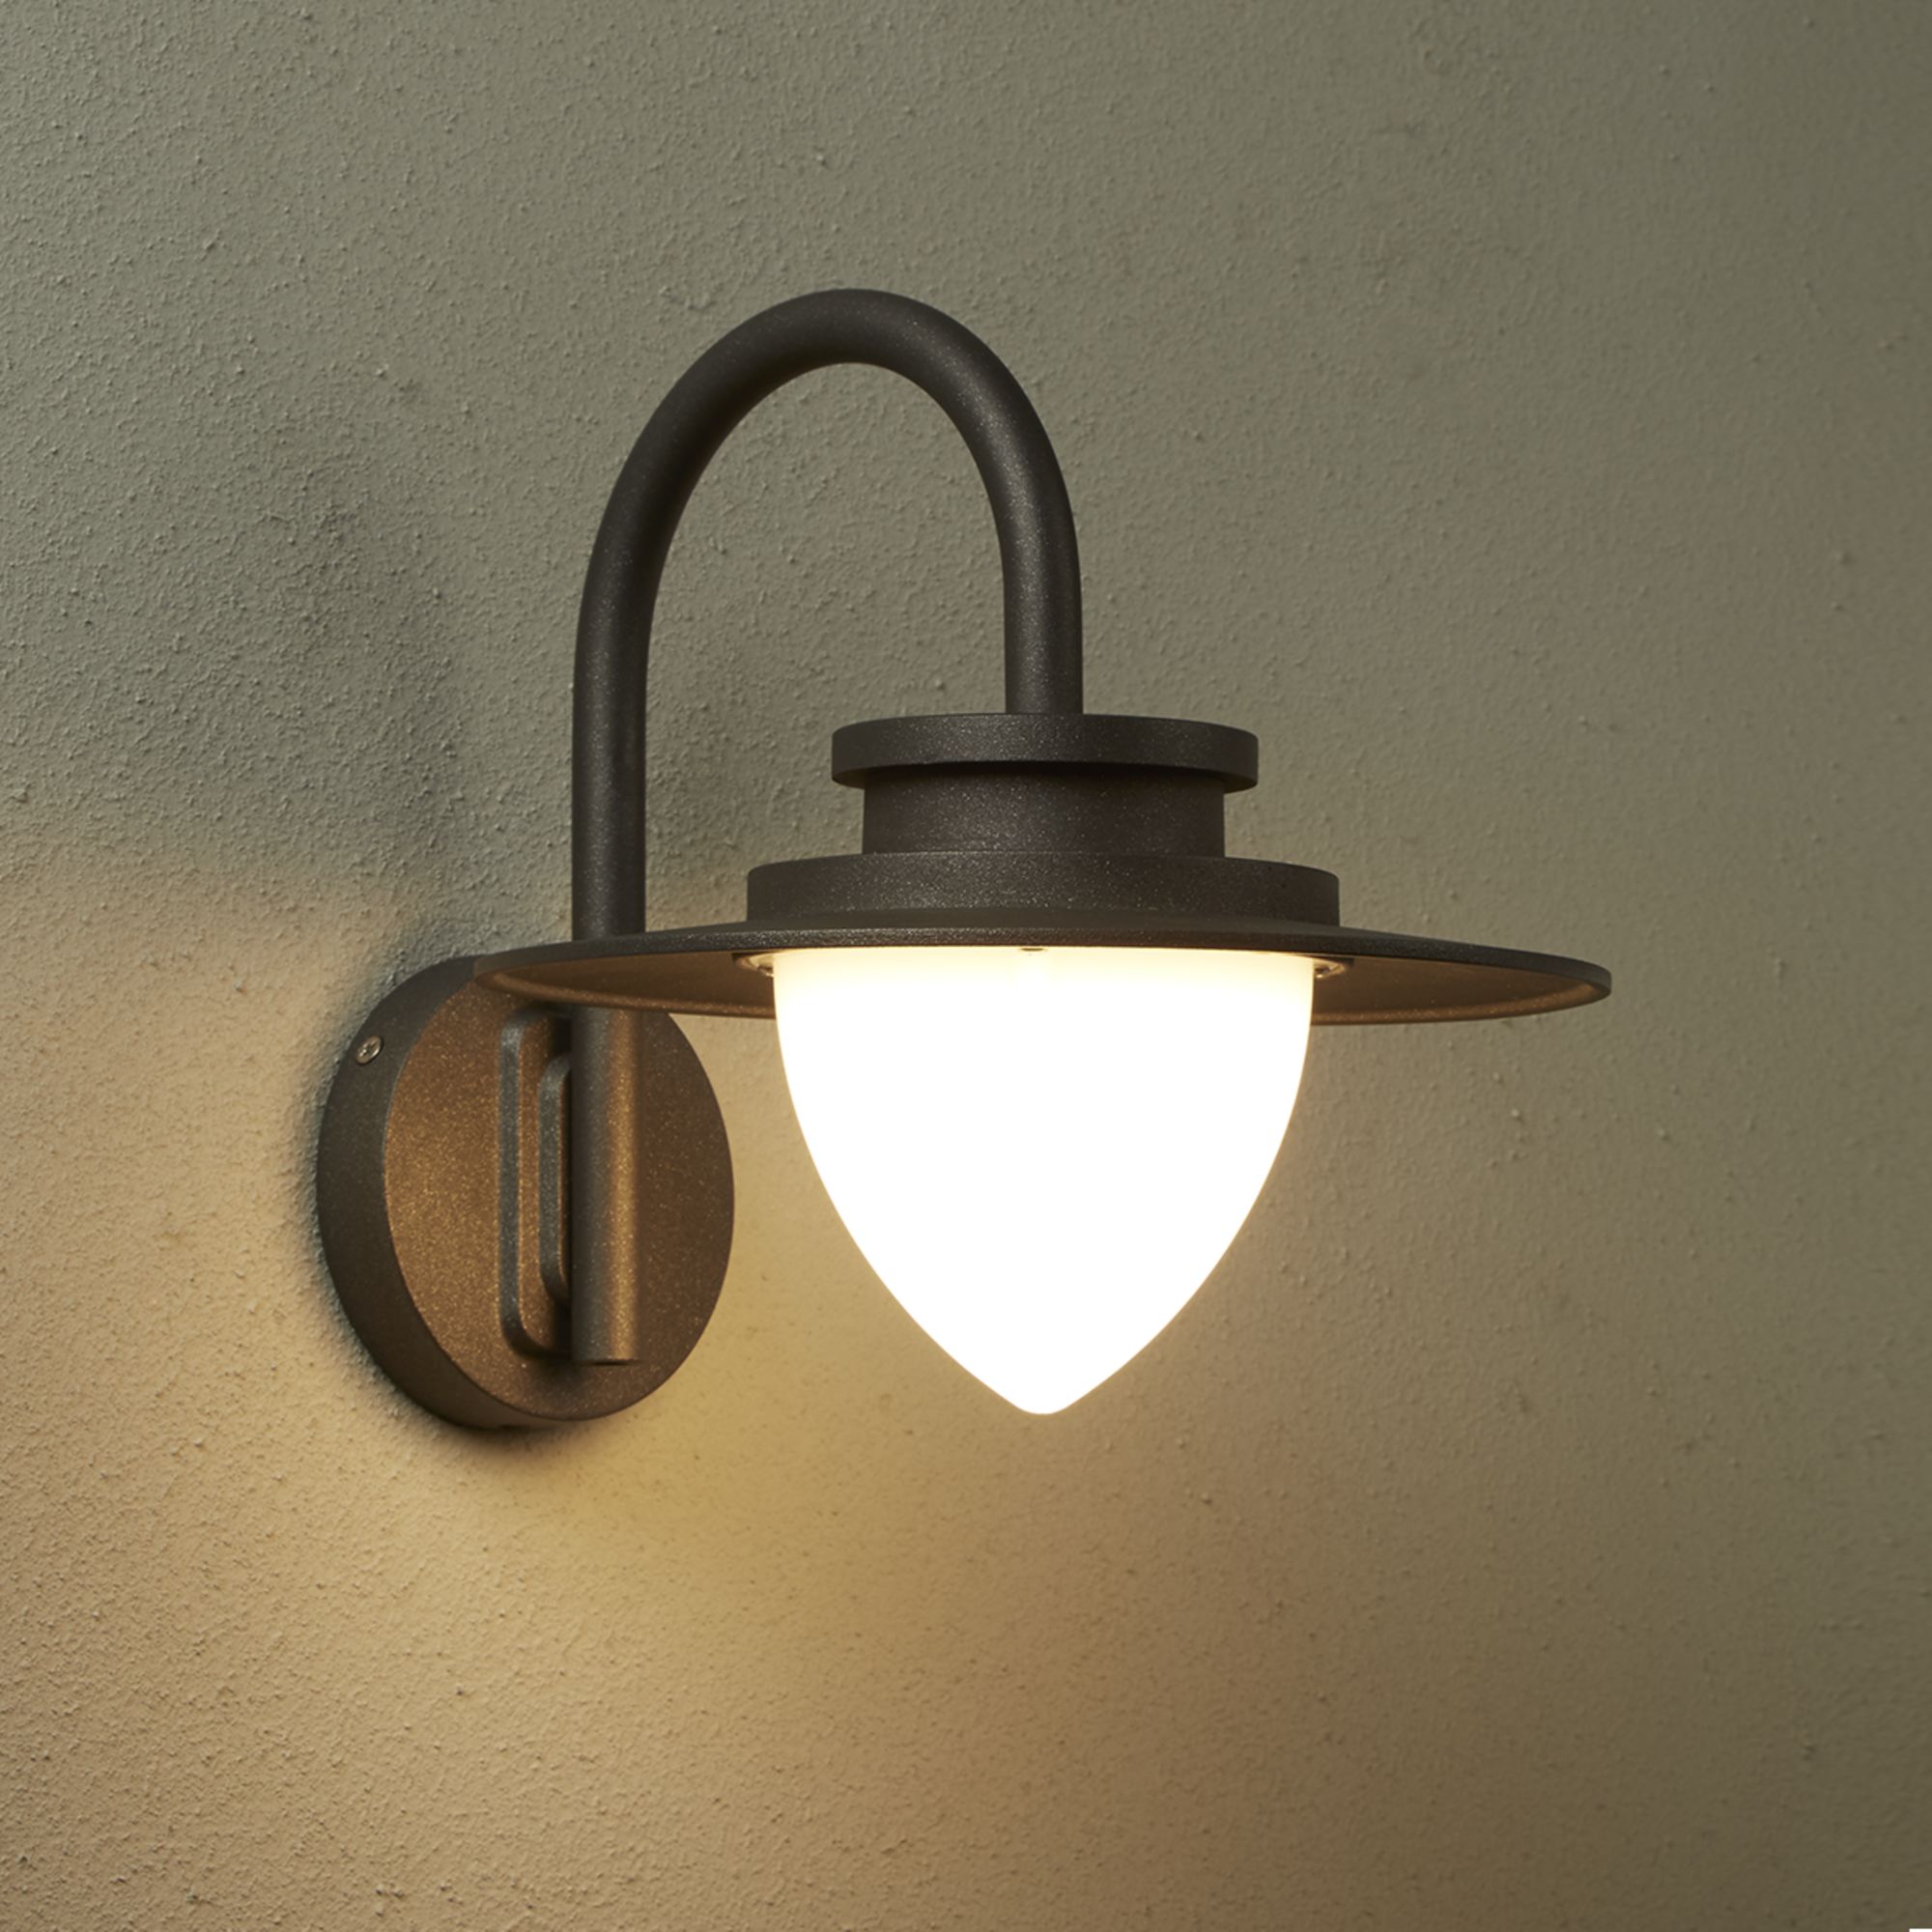 An example of exterior wall lights in style Texas